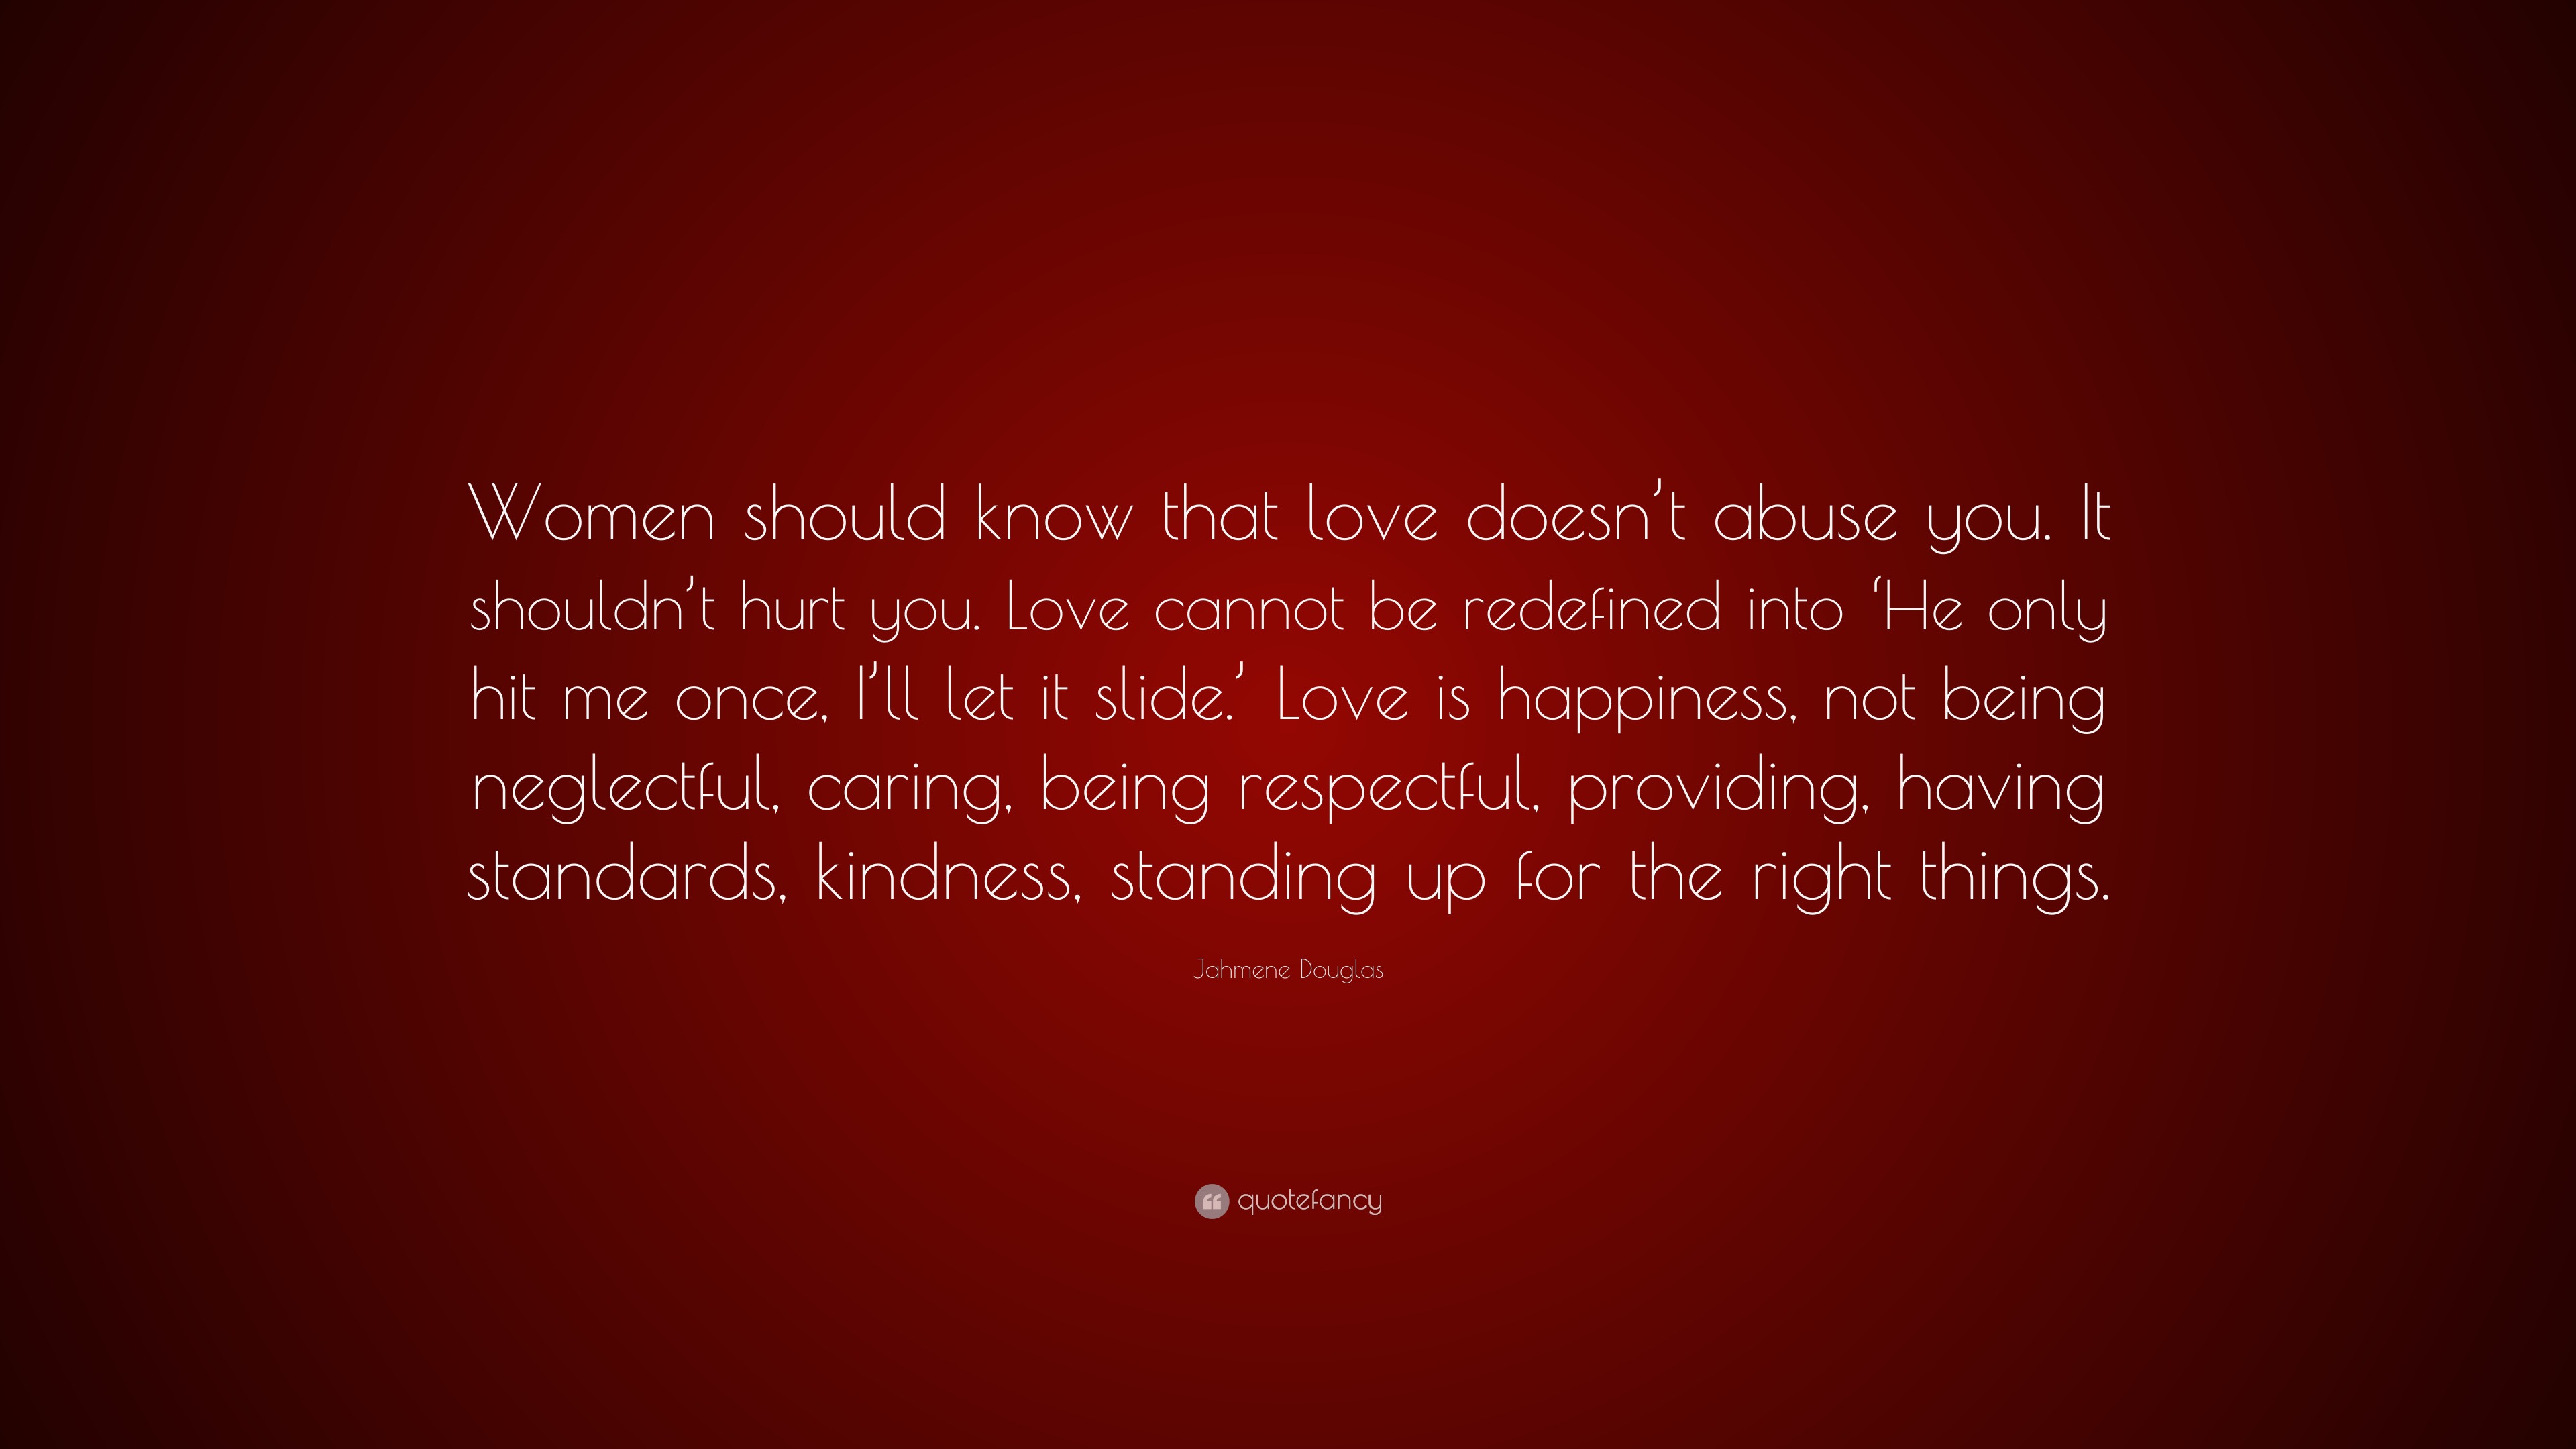 Jahmene Douglas Quote “Women should know that love doesn t abuse you